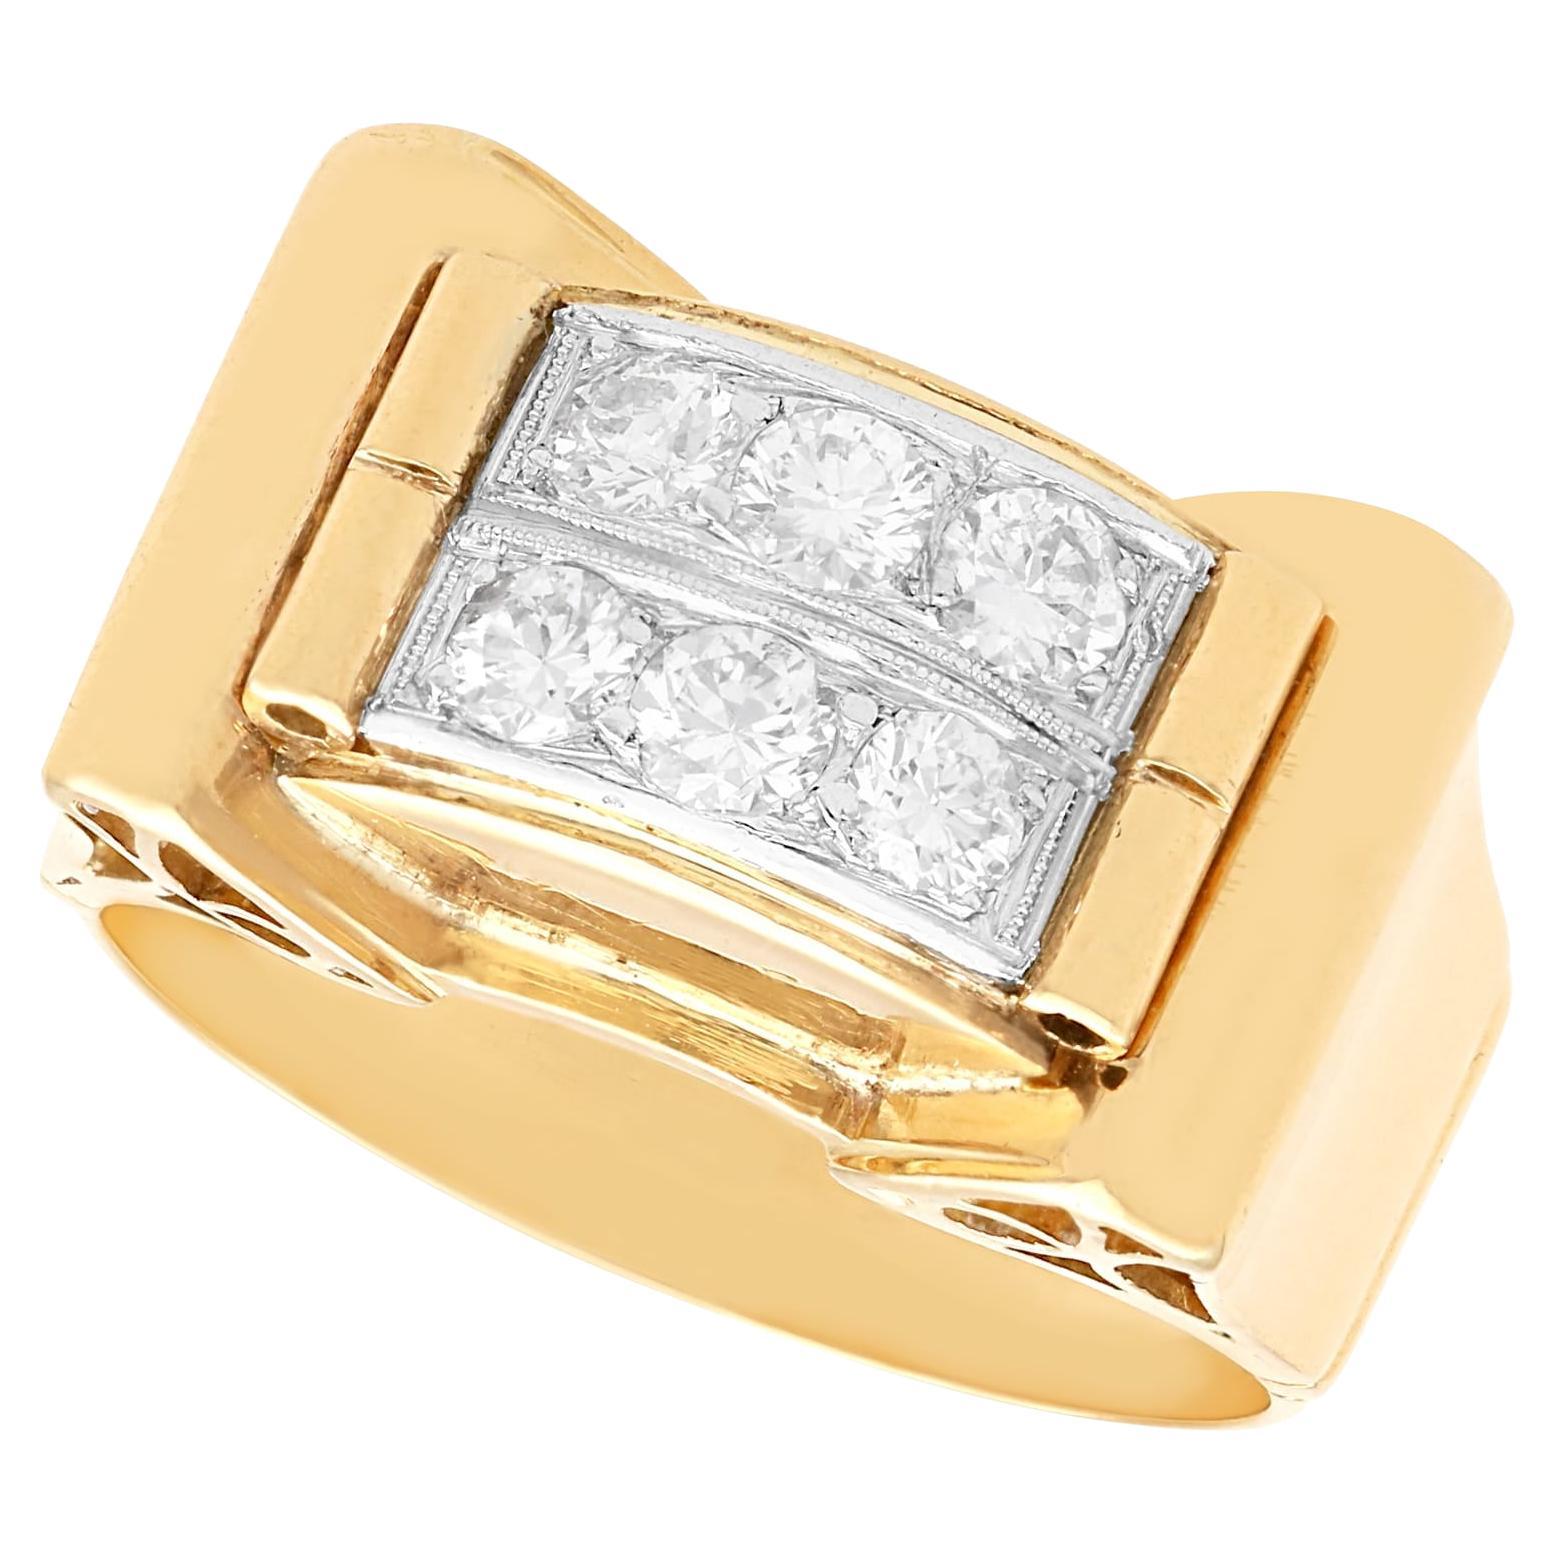 Vintage 1940s Art Deco Diamond and Gold Cocktail Ring